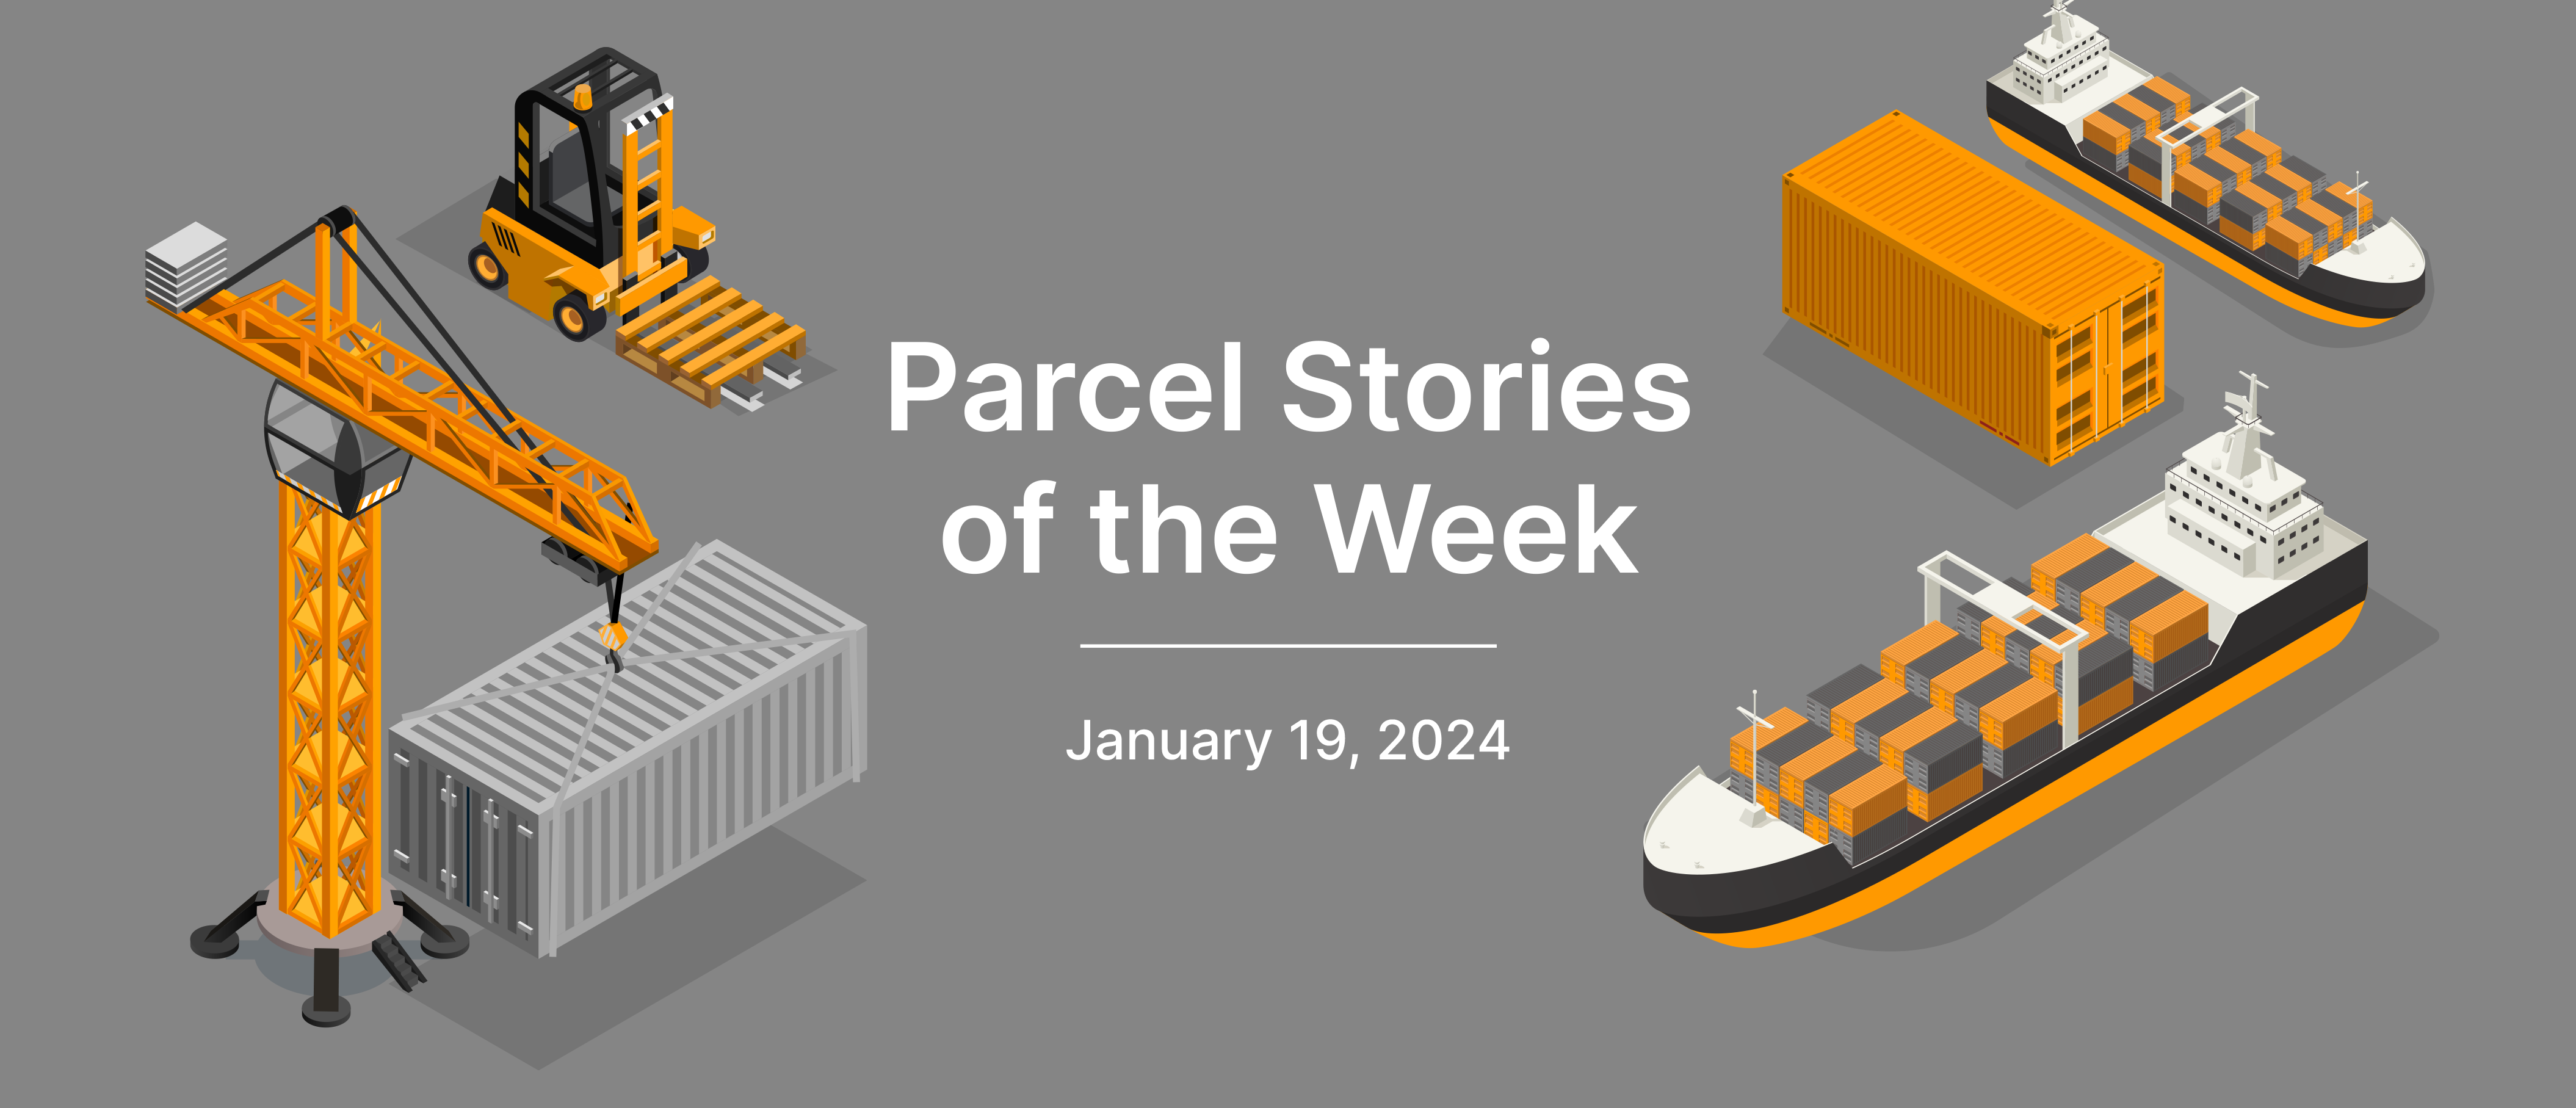 This Week in Parcel: January 19, 2024